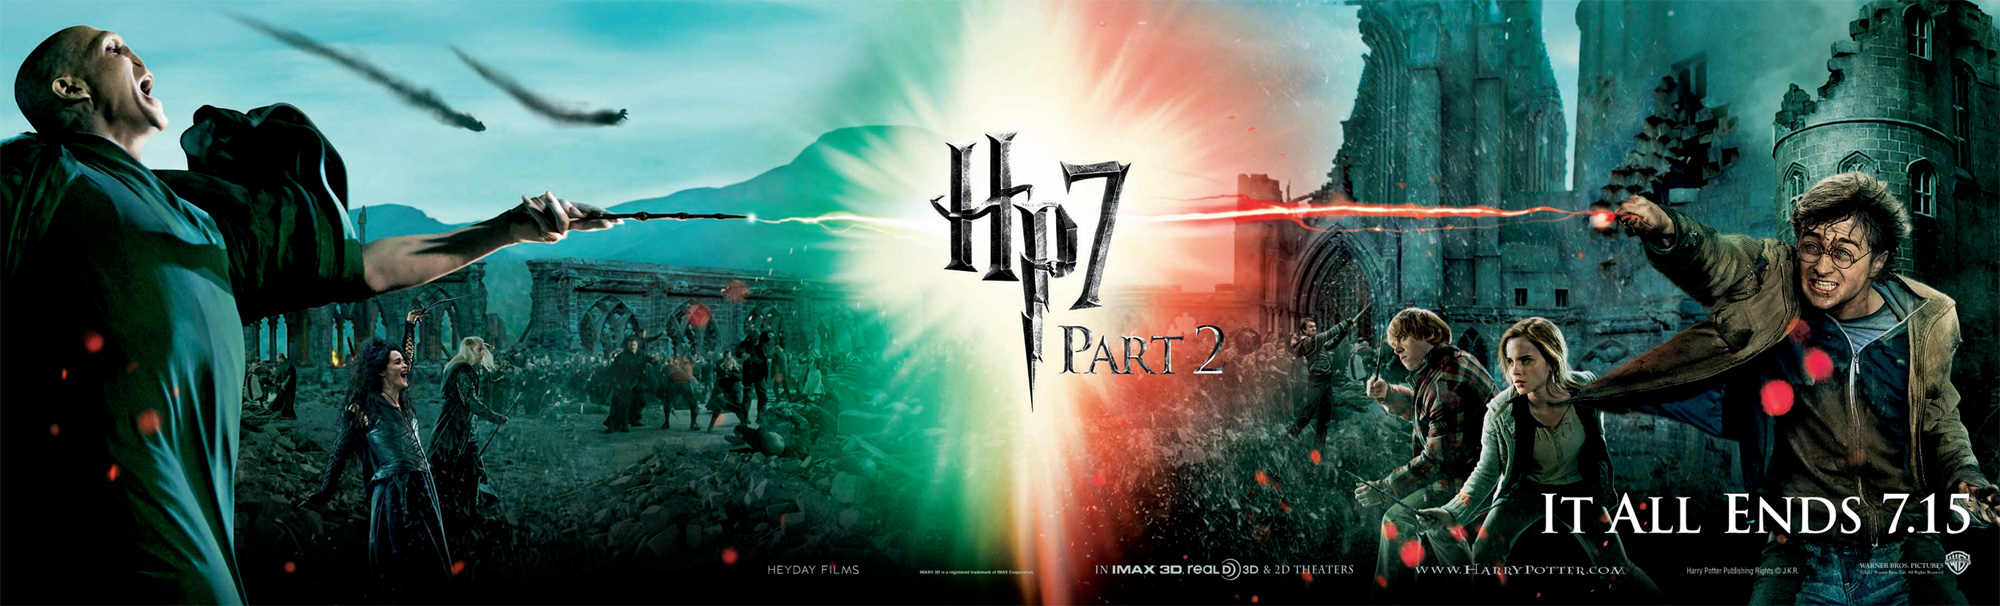 Harry Potter and the Part II Movie Poster -